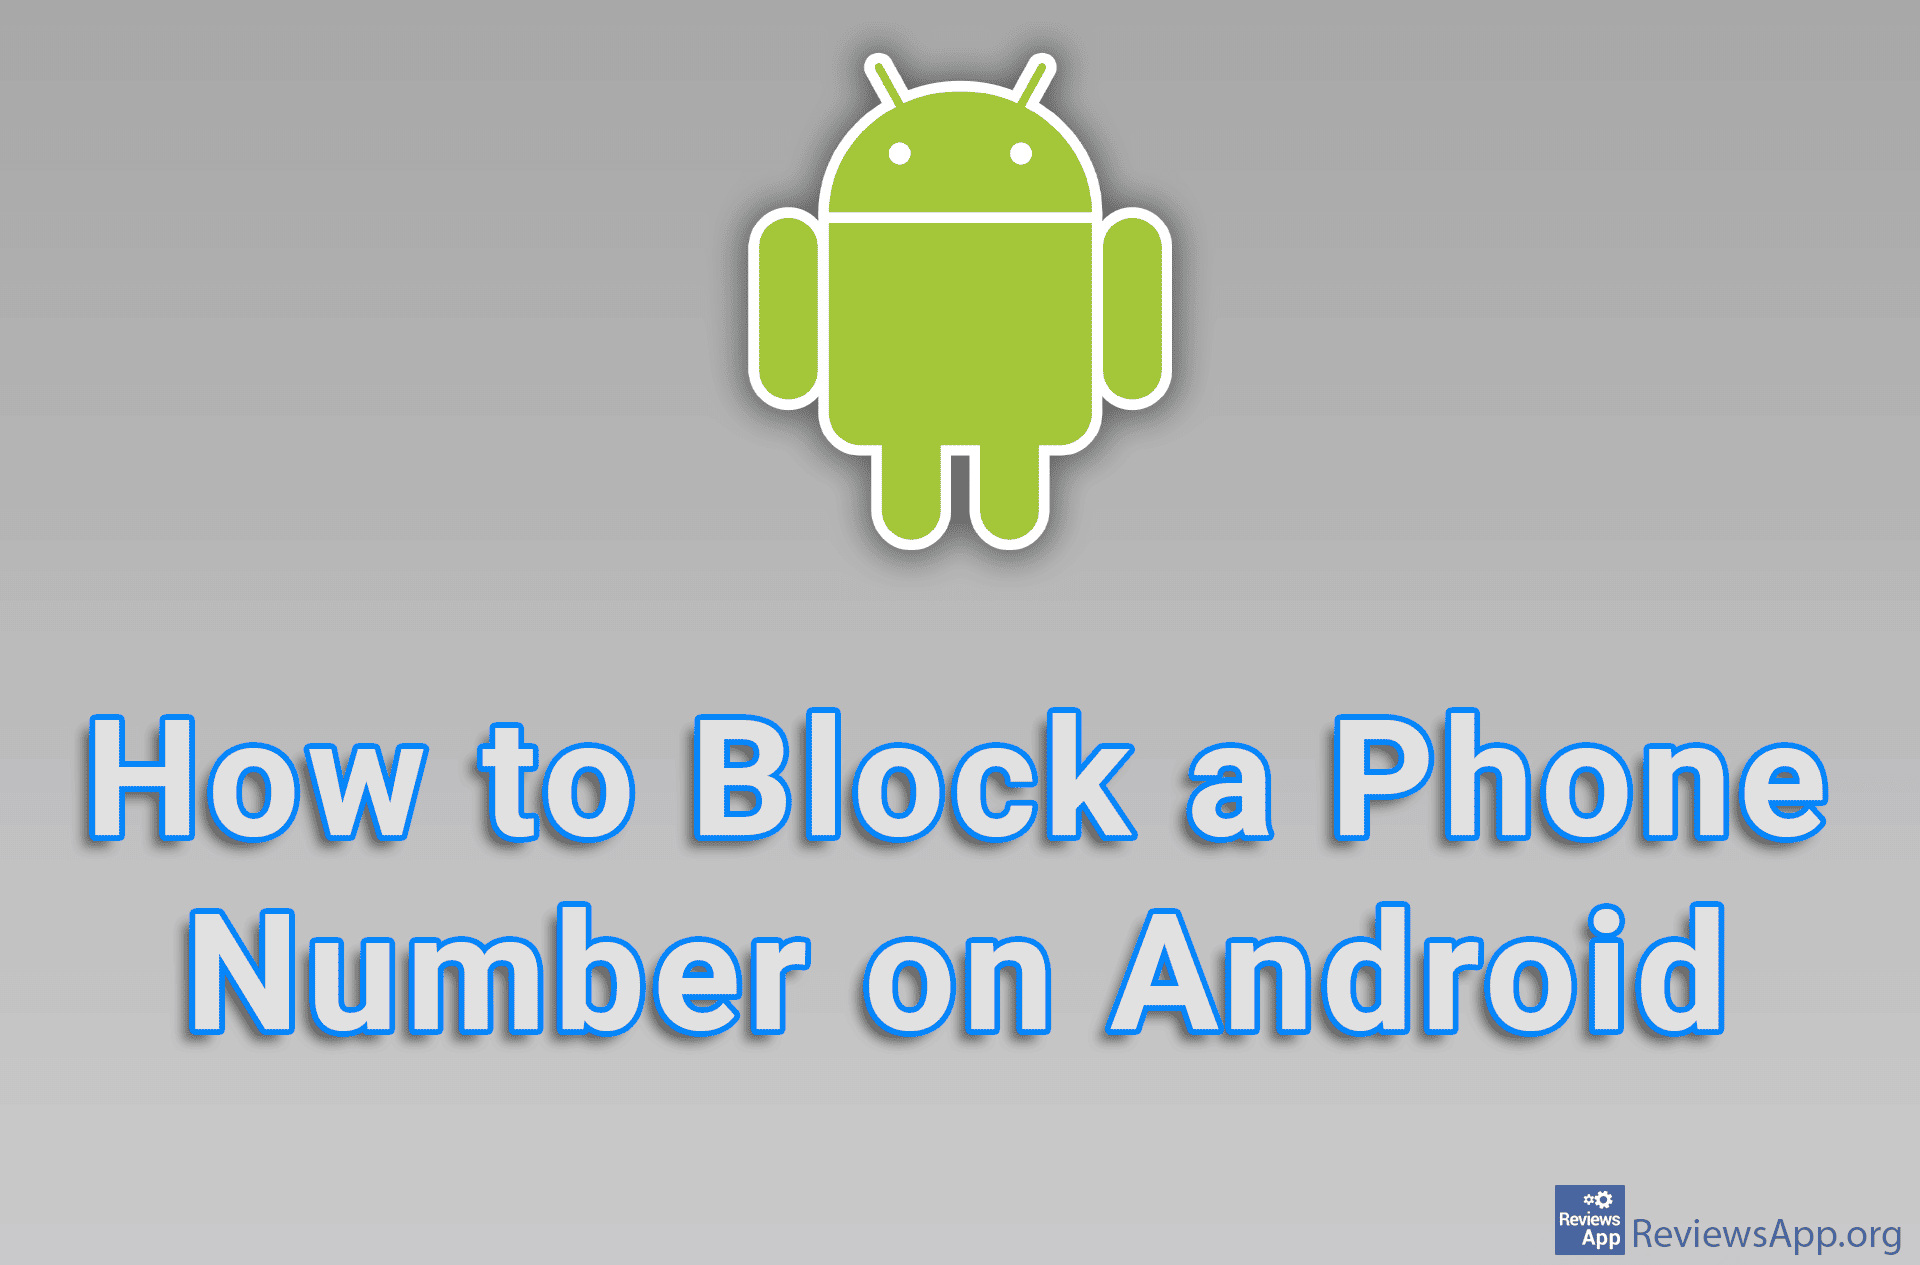 How to Block a Phone Number on Android